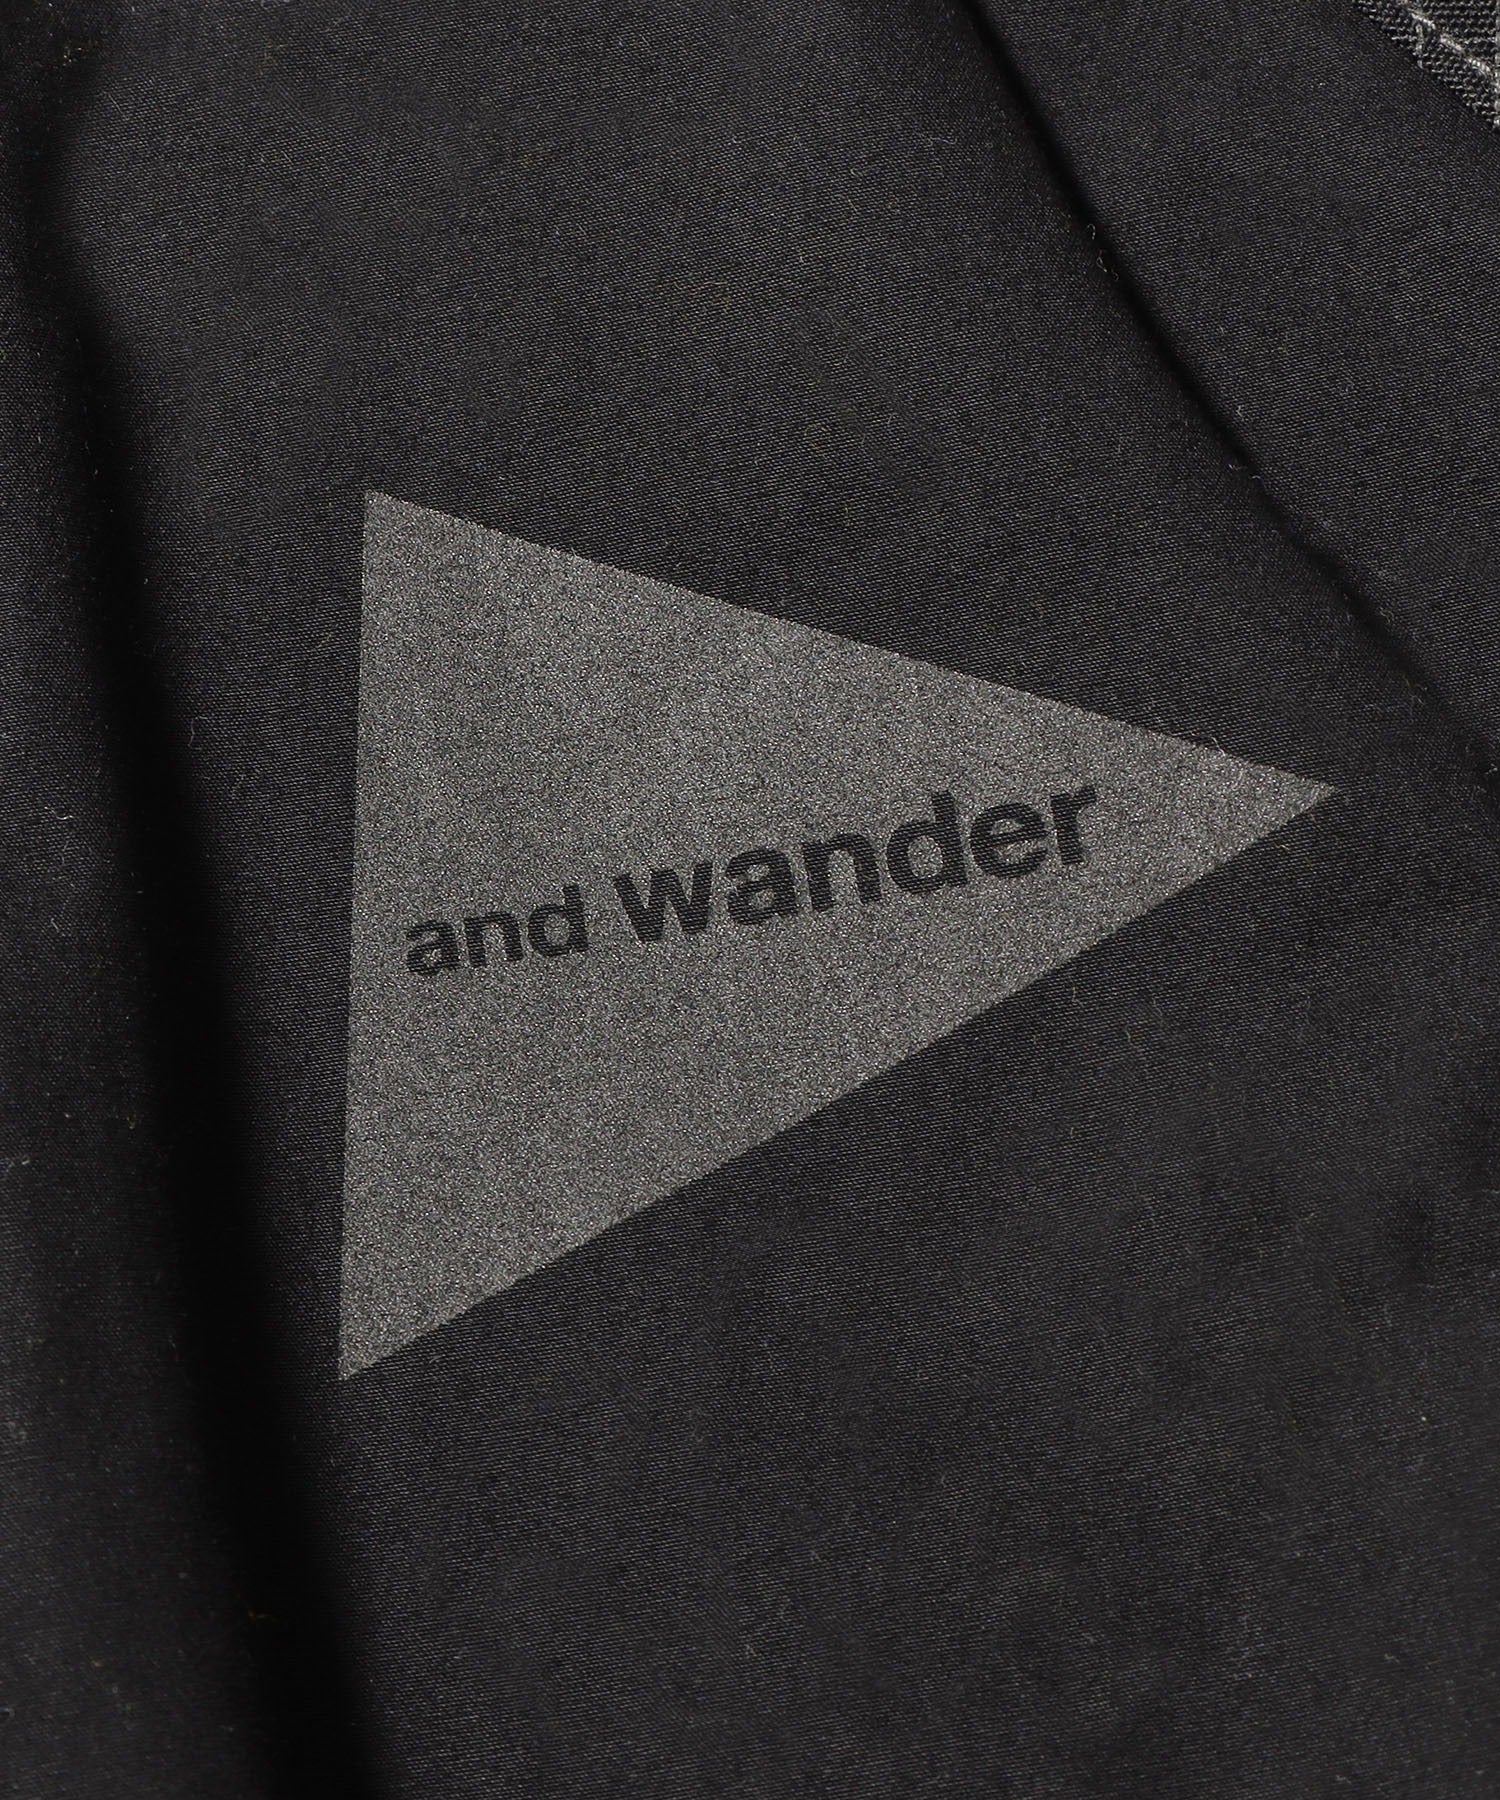 and wander×Danner field parka